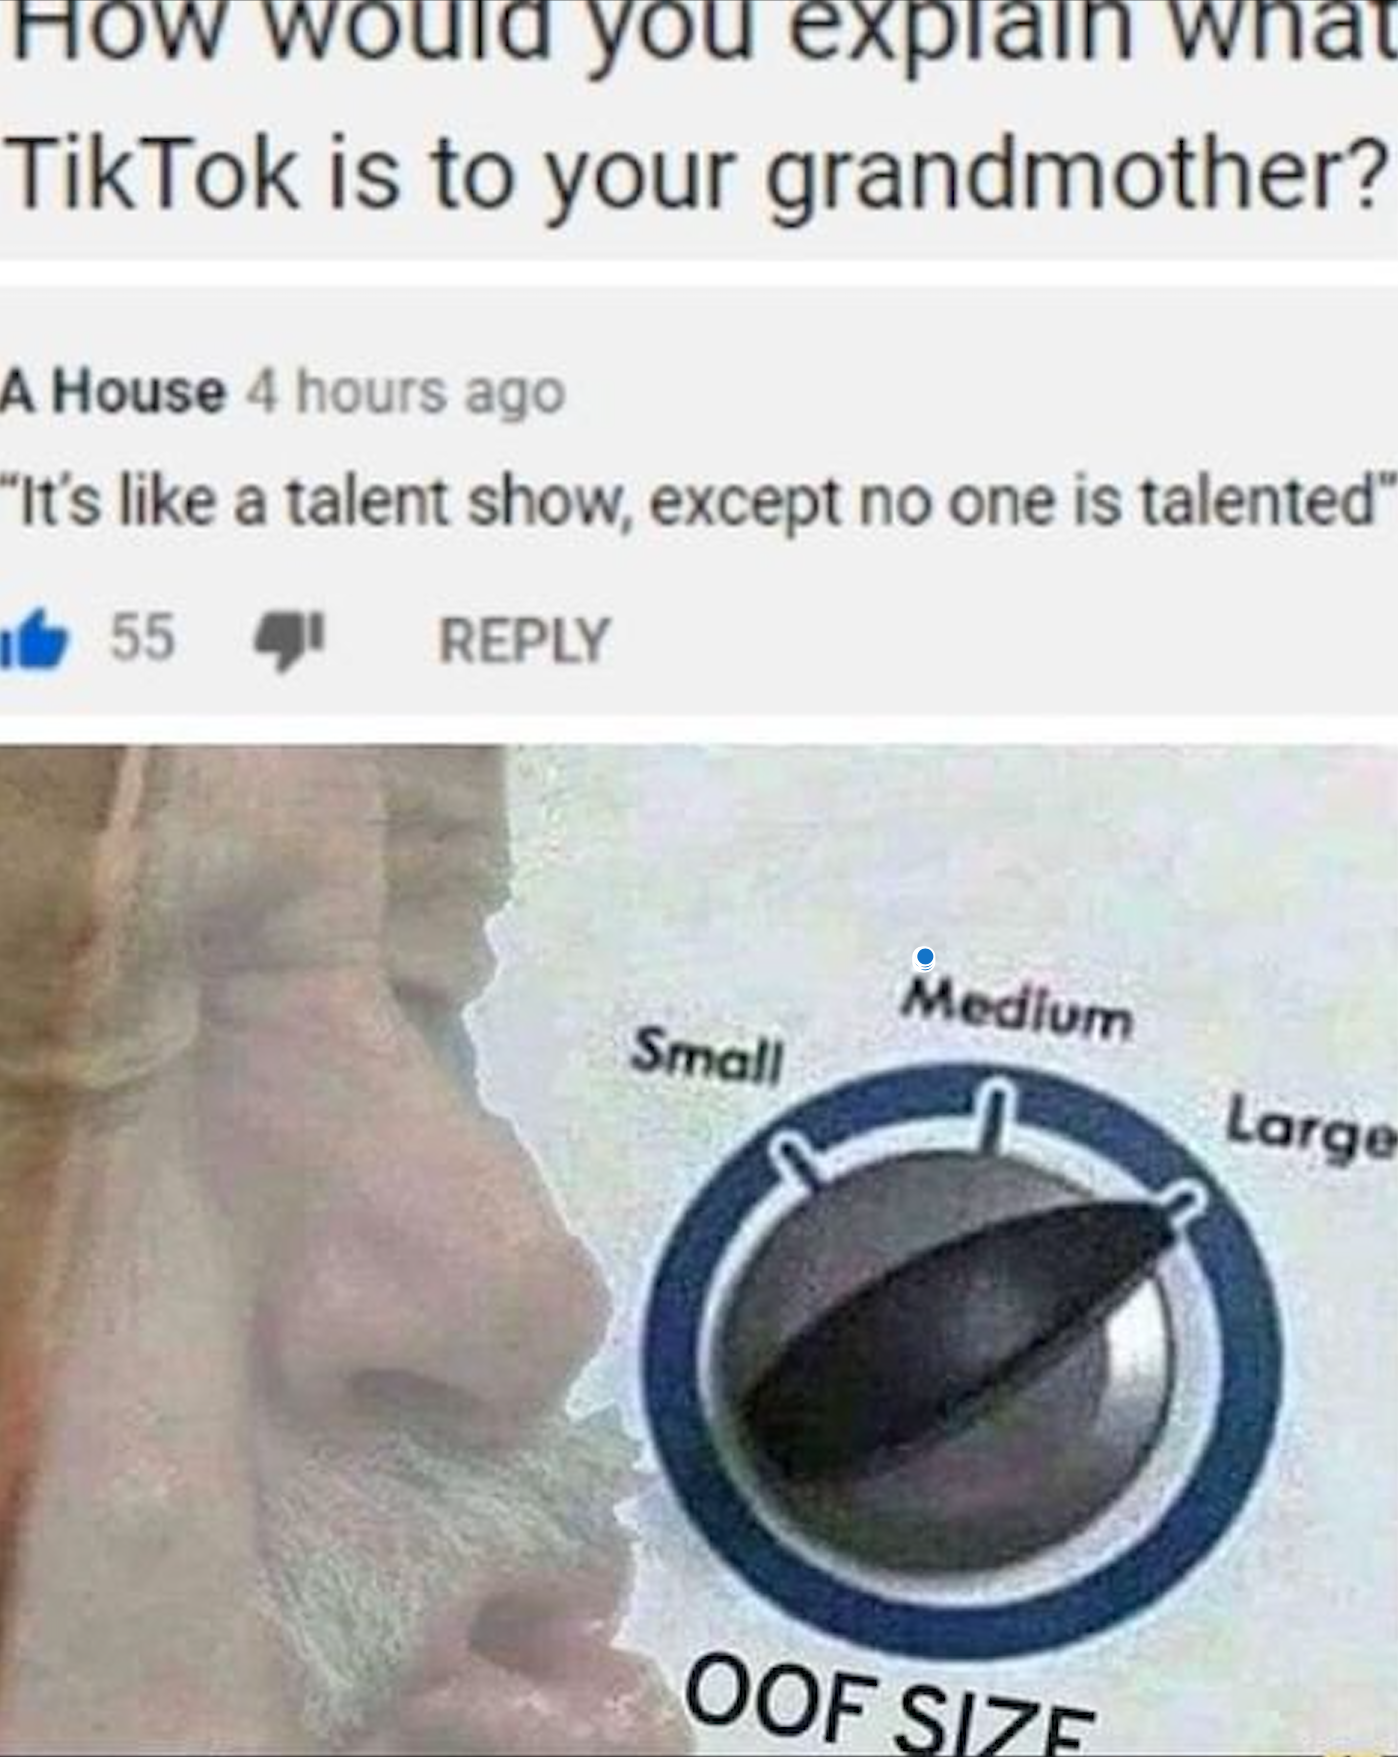 apple music vs spotify meme - How would you explain what TikTok is to your grandmother? A House 4 hours ago "It's a talent show, except no one is talented" b554 Medium Small Large Oof Size